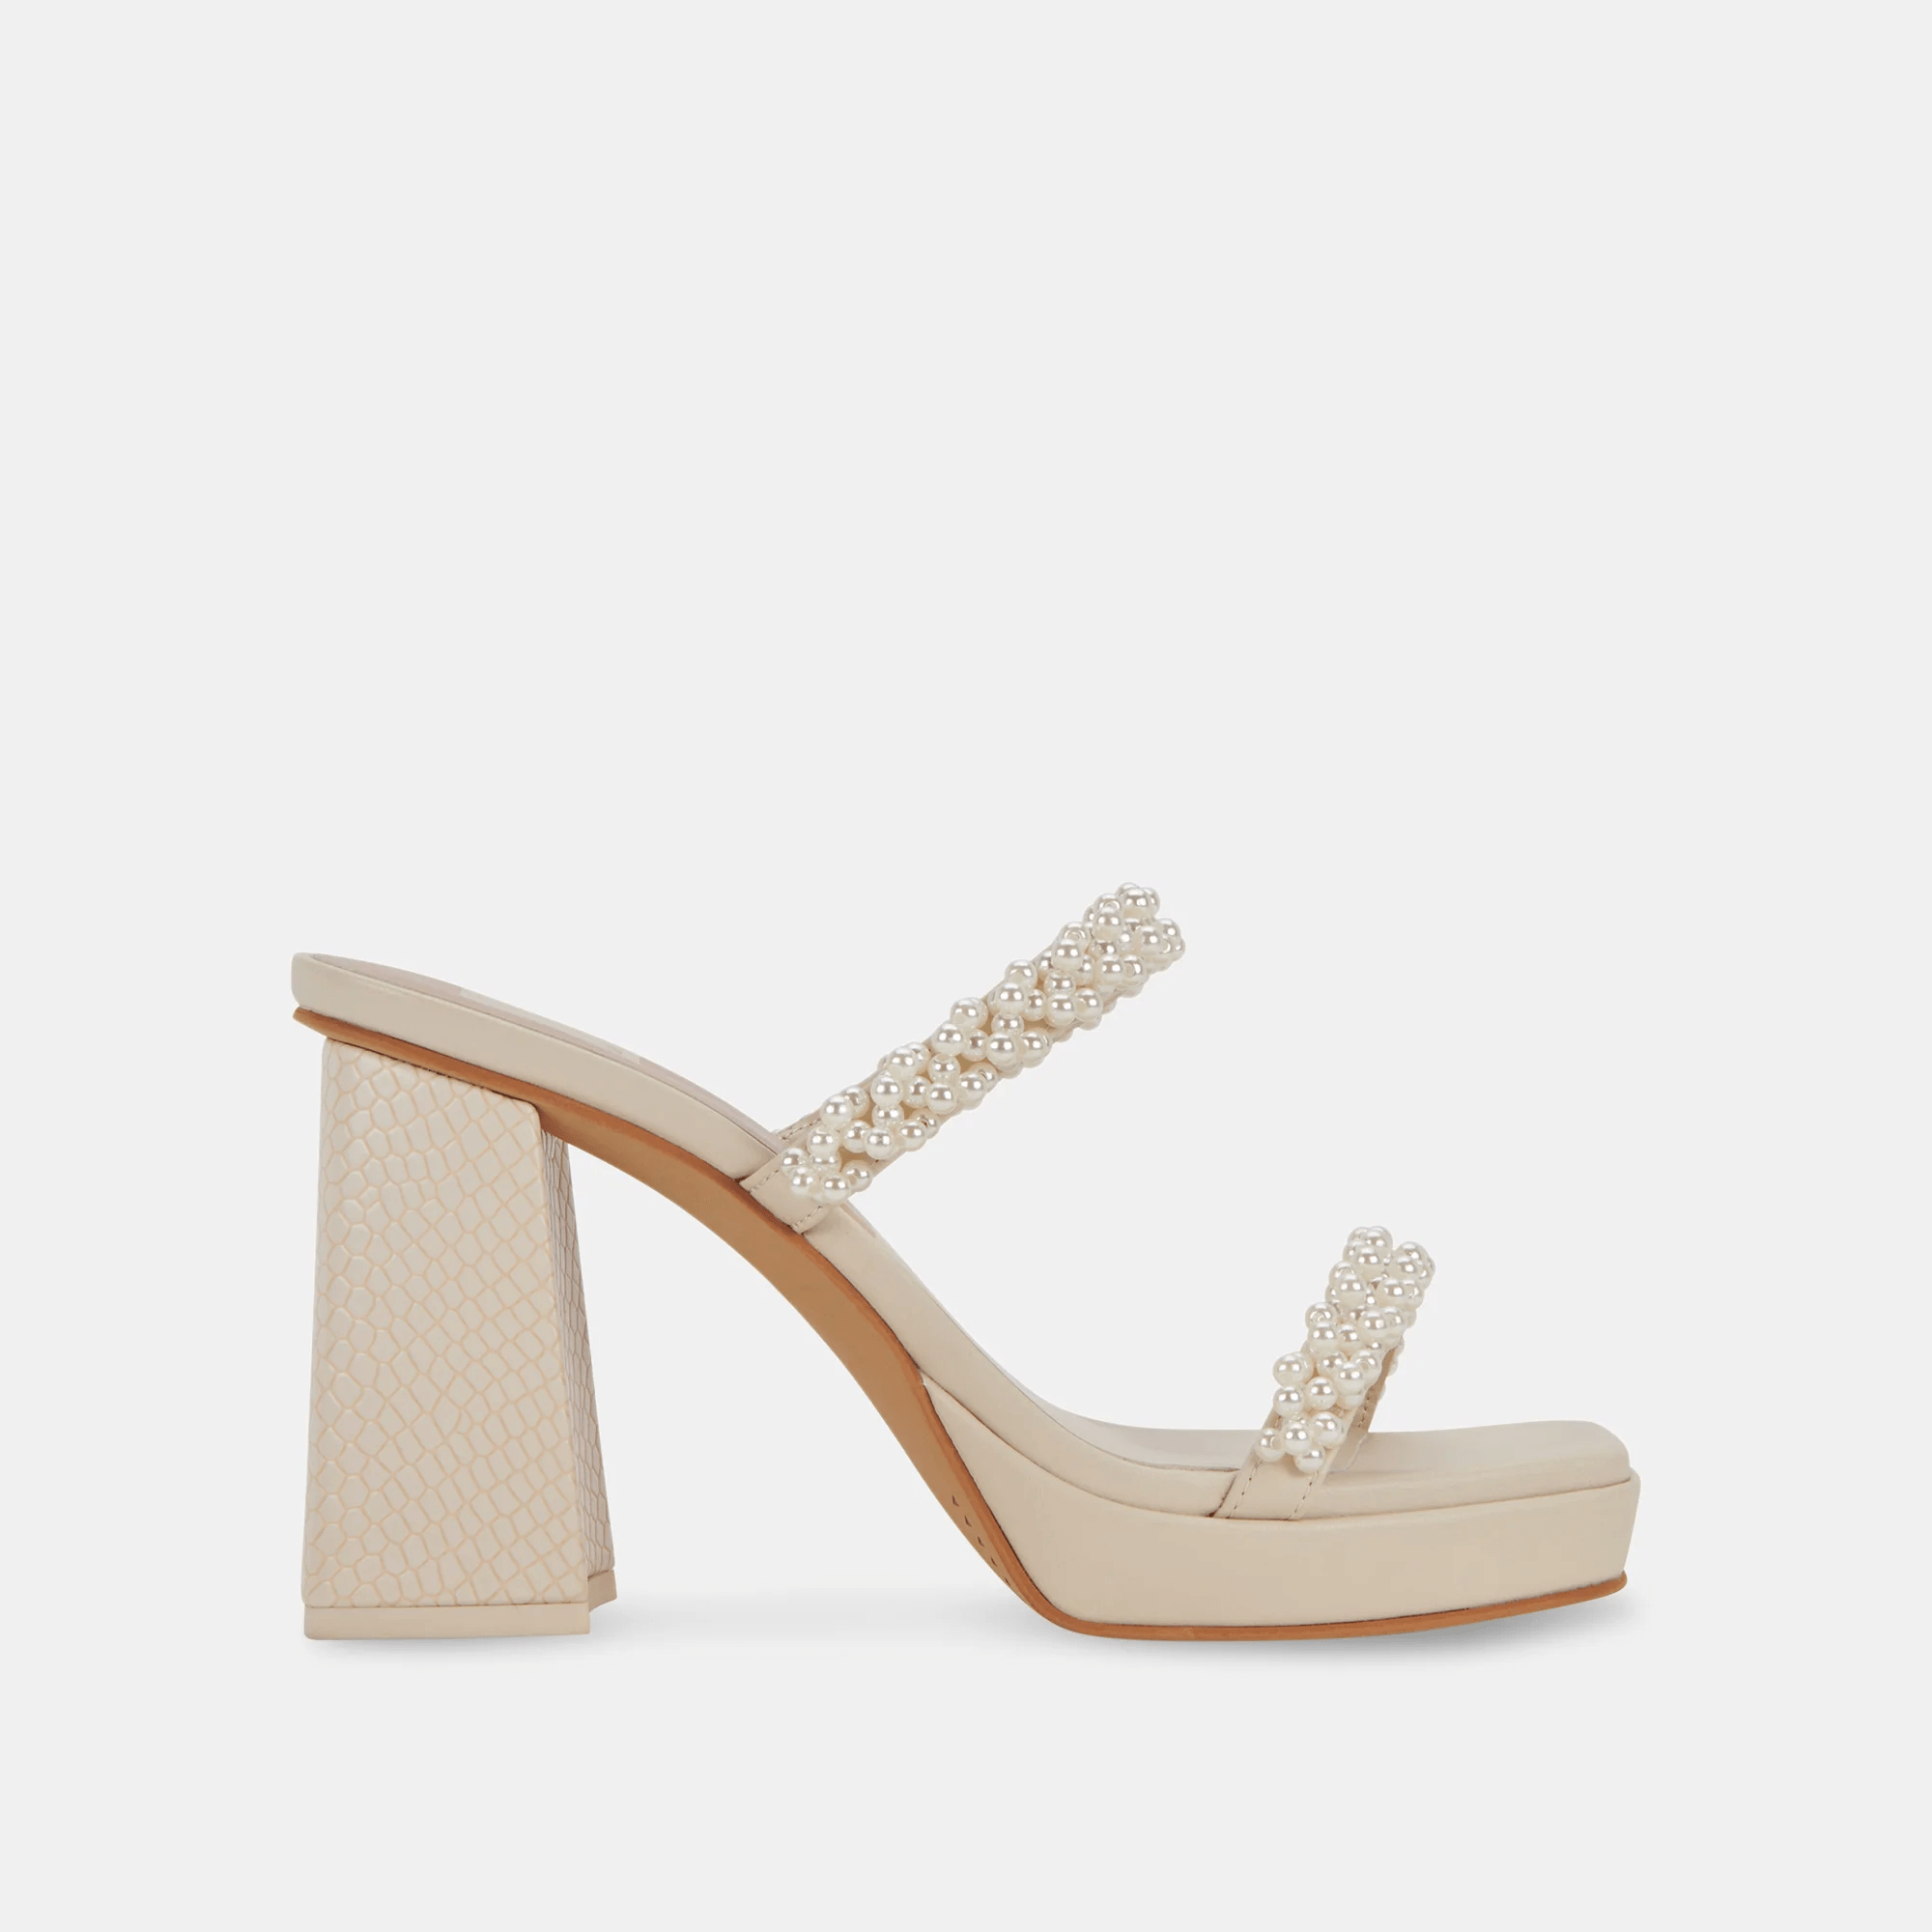 "Ariele" Double, Pearl-Encrusted Straps on Sandal with Chunky Heel -Dolce Vita Footwear, Inc.- Ruby Jane-